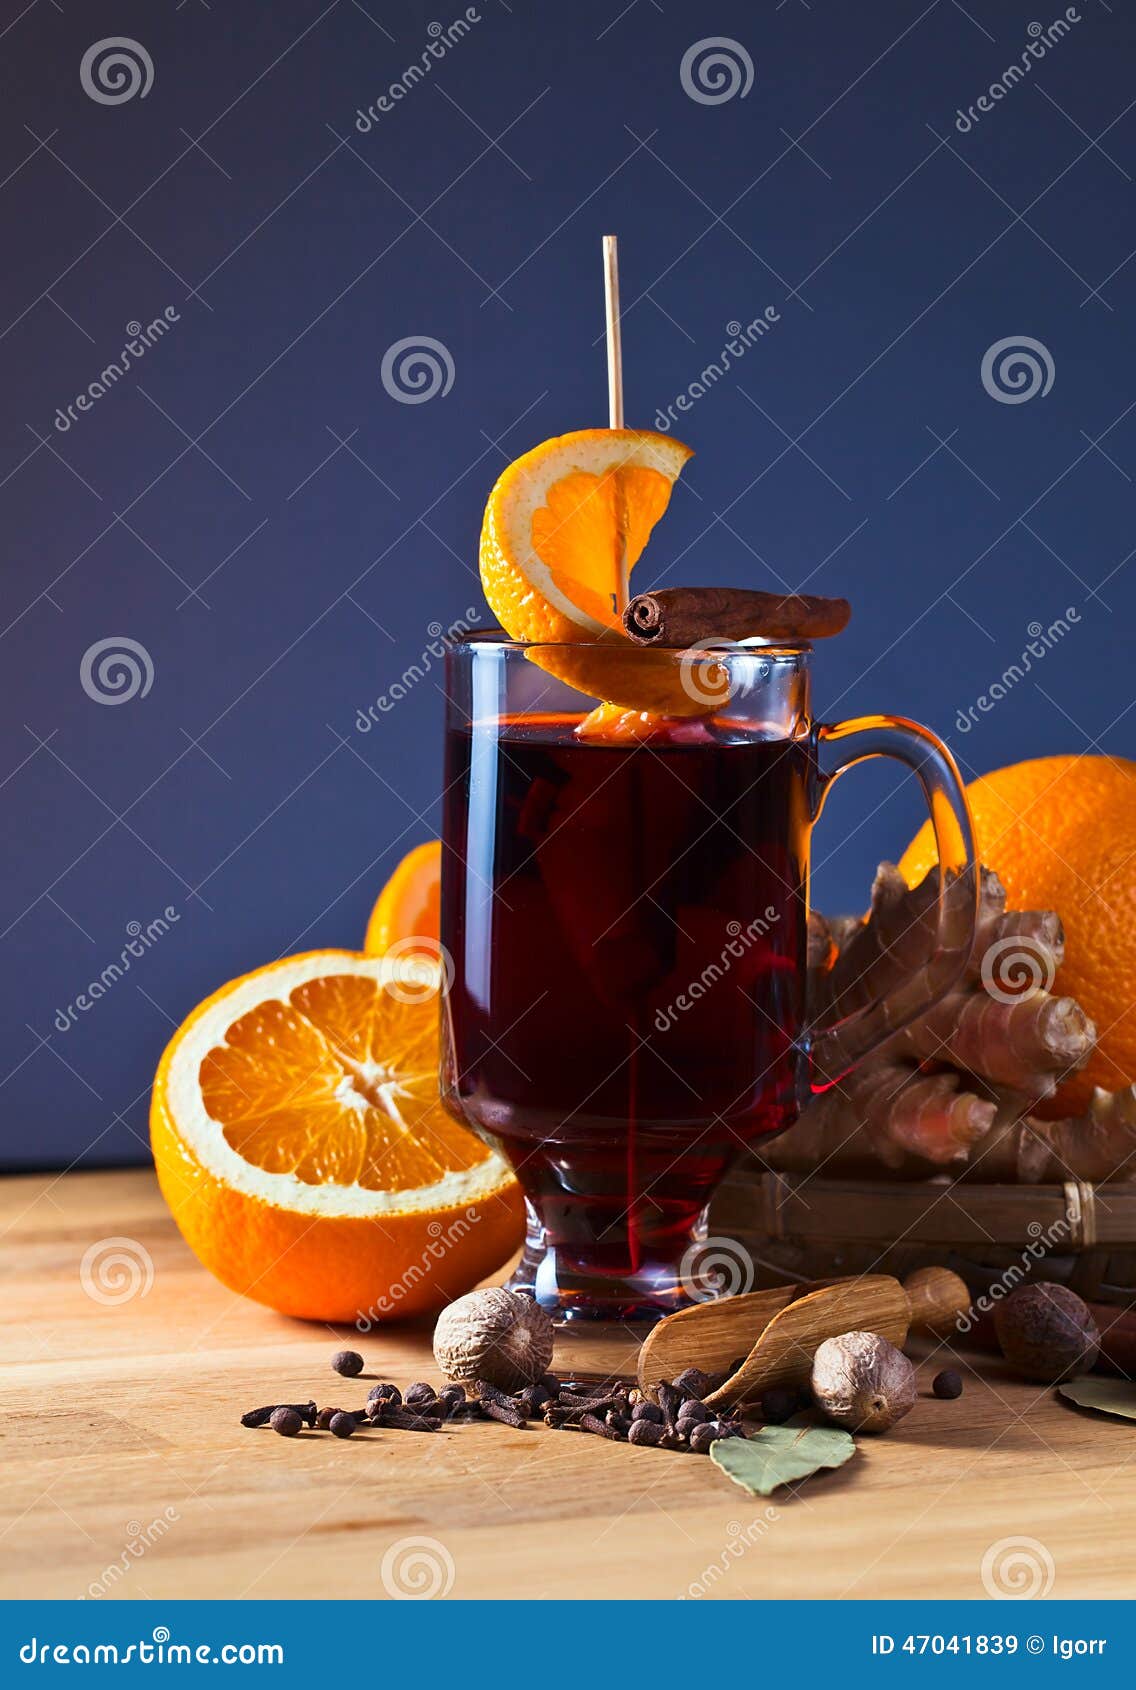 Mulled wine with spices stock image. Image of gourmet - 47041839